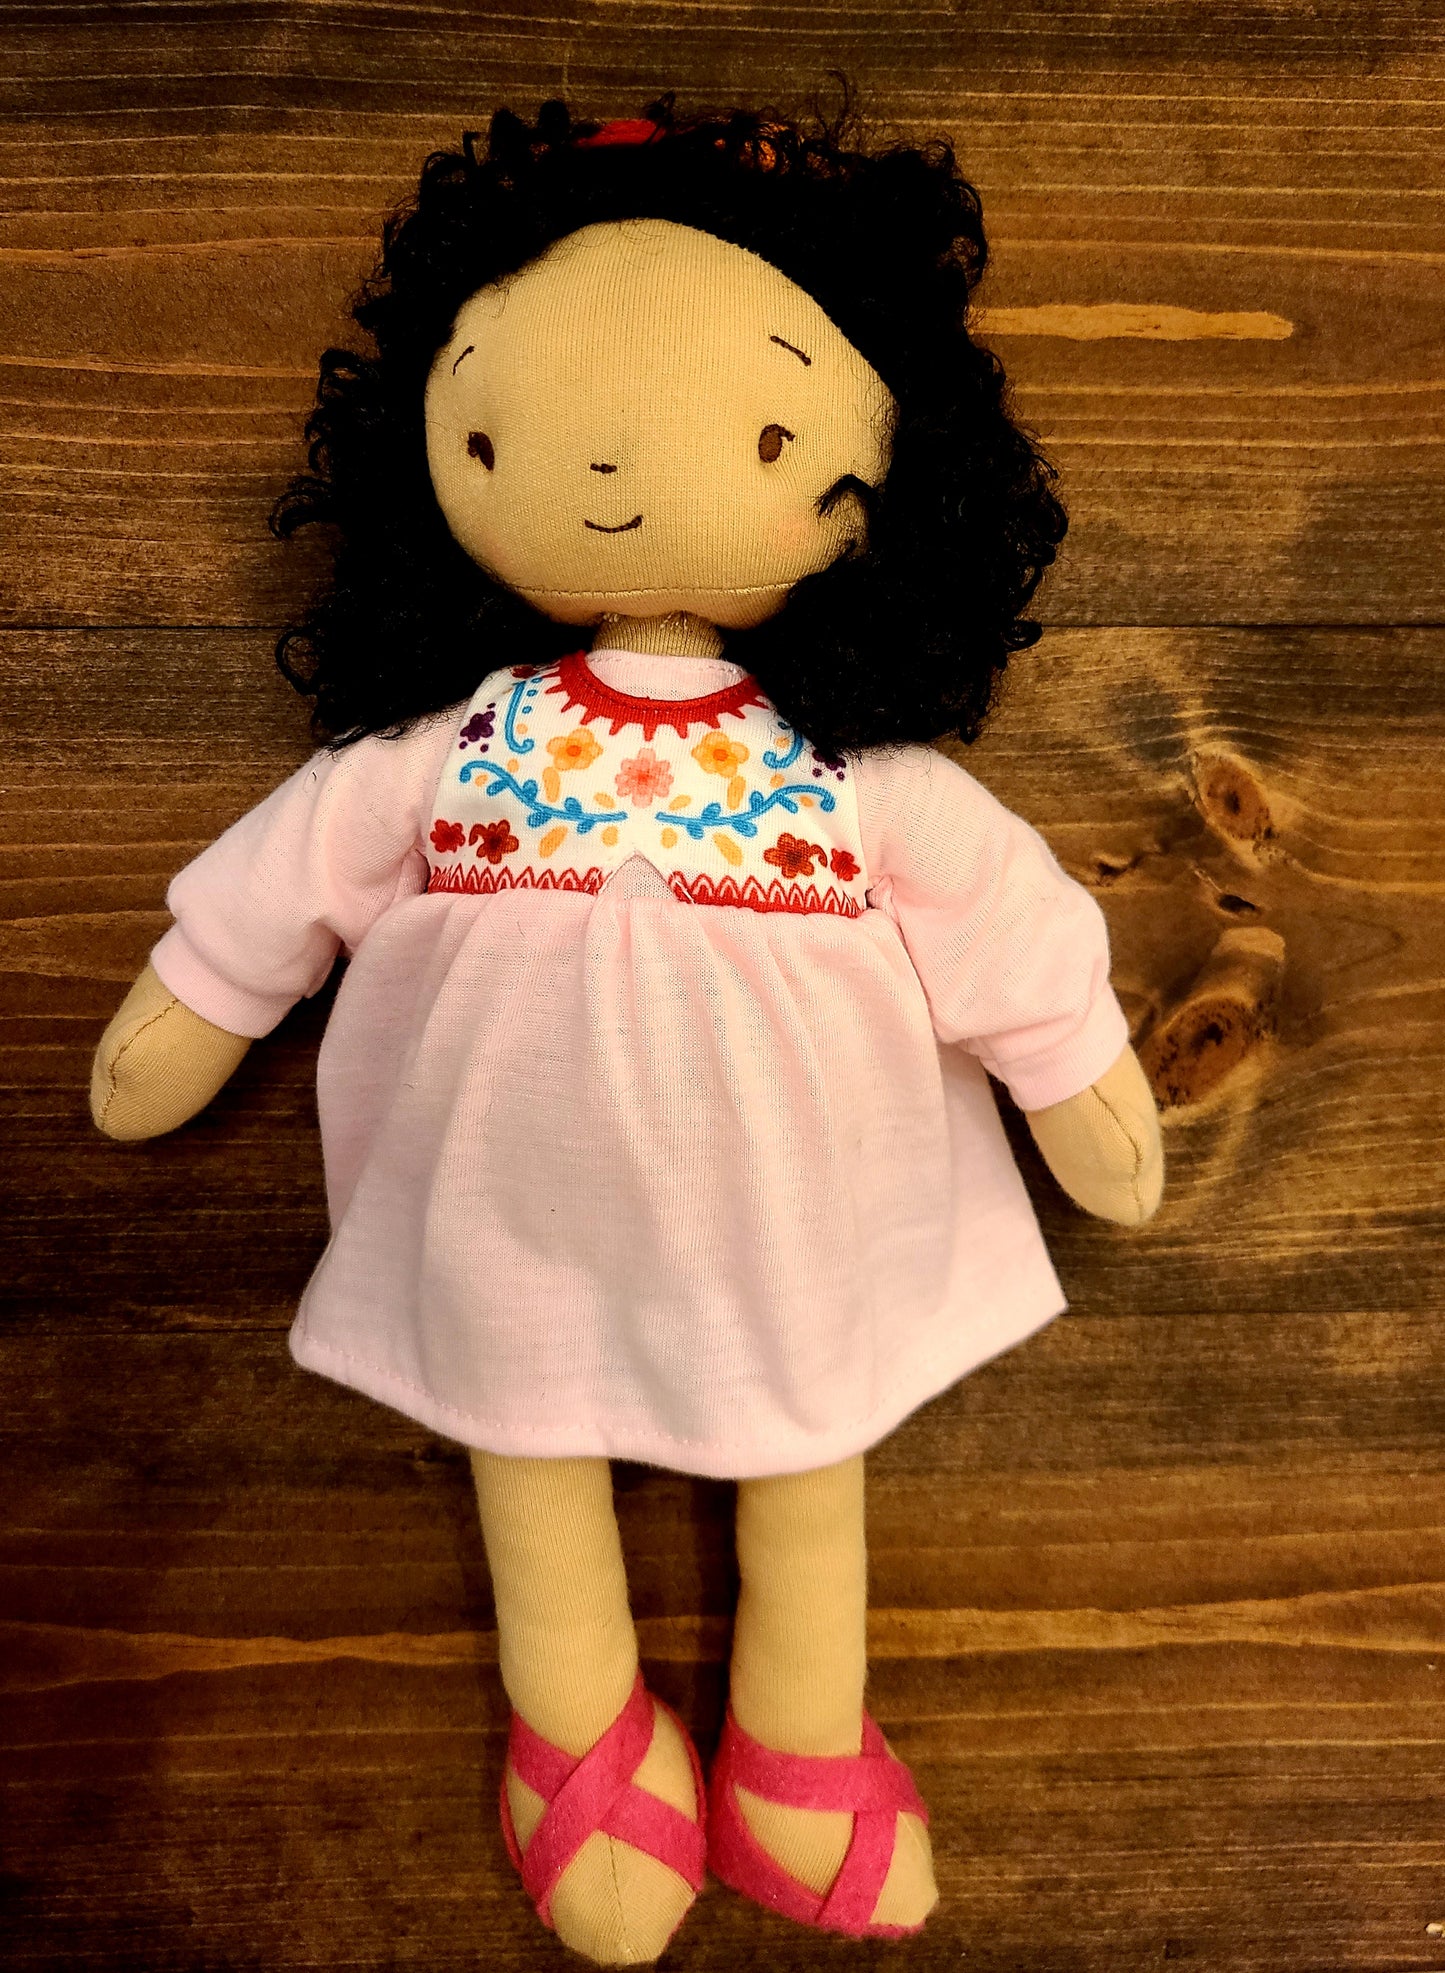 Soft Rag 12in  Floral Dress Girl Plush Doll Toy/Handmade Baby Gift Toy/Global Sister